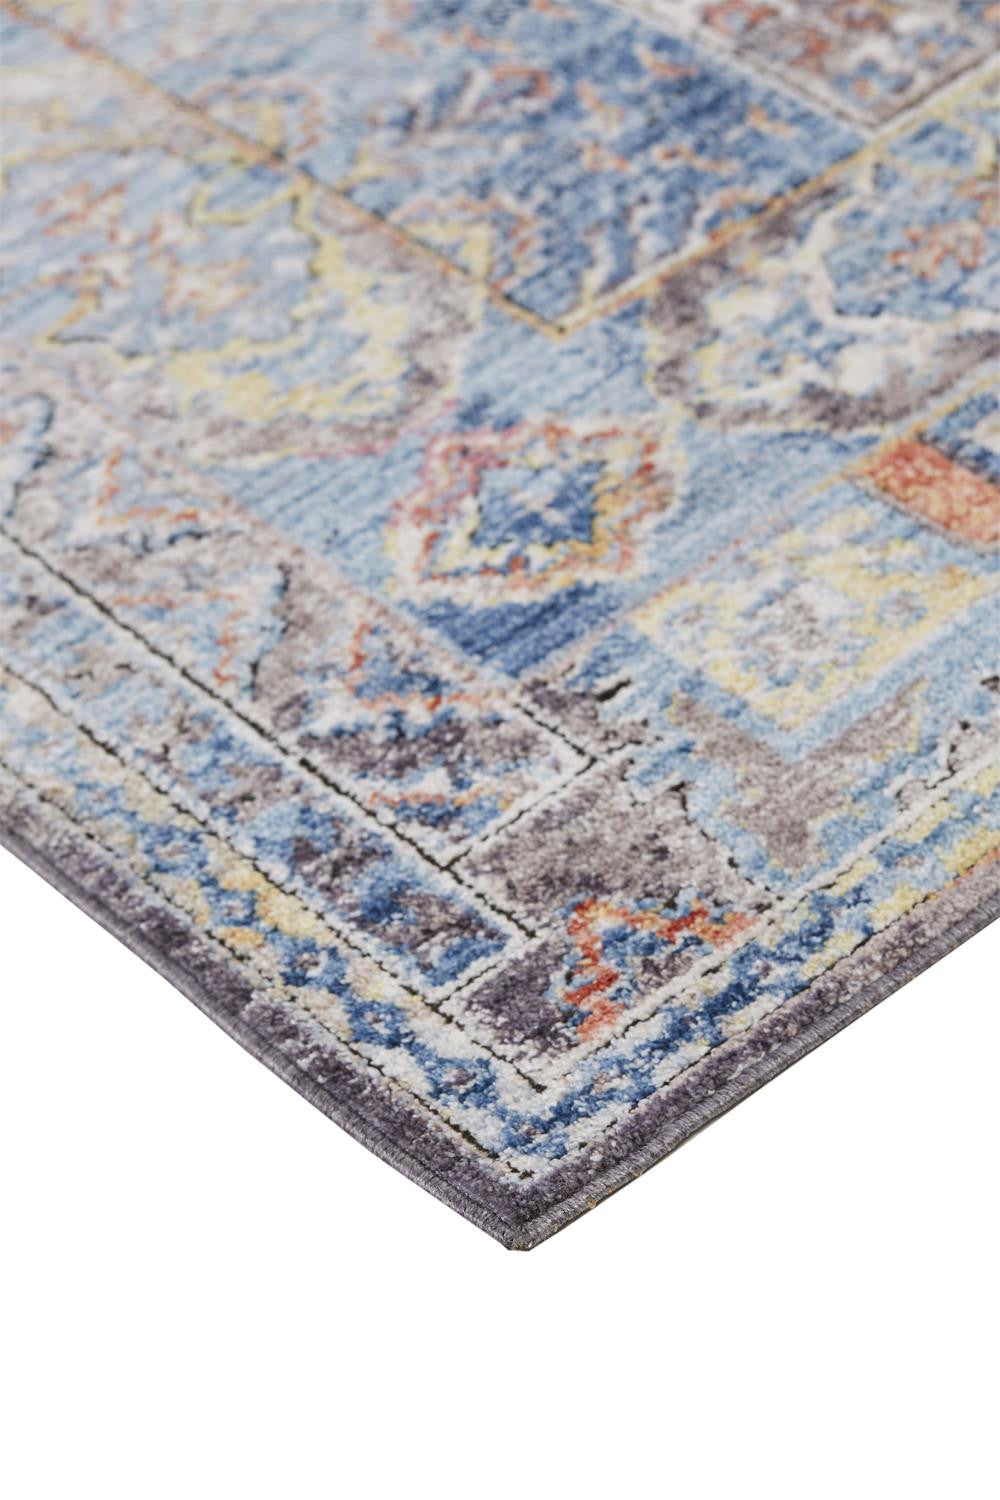 8' x 10' Blue and Ivory Floral Area Rug